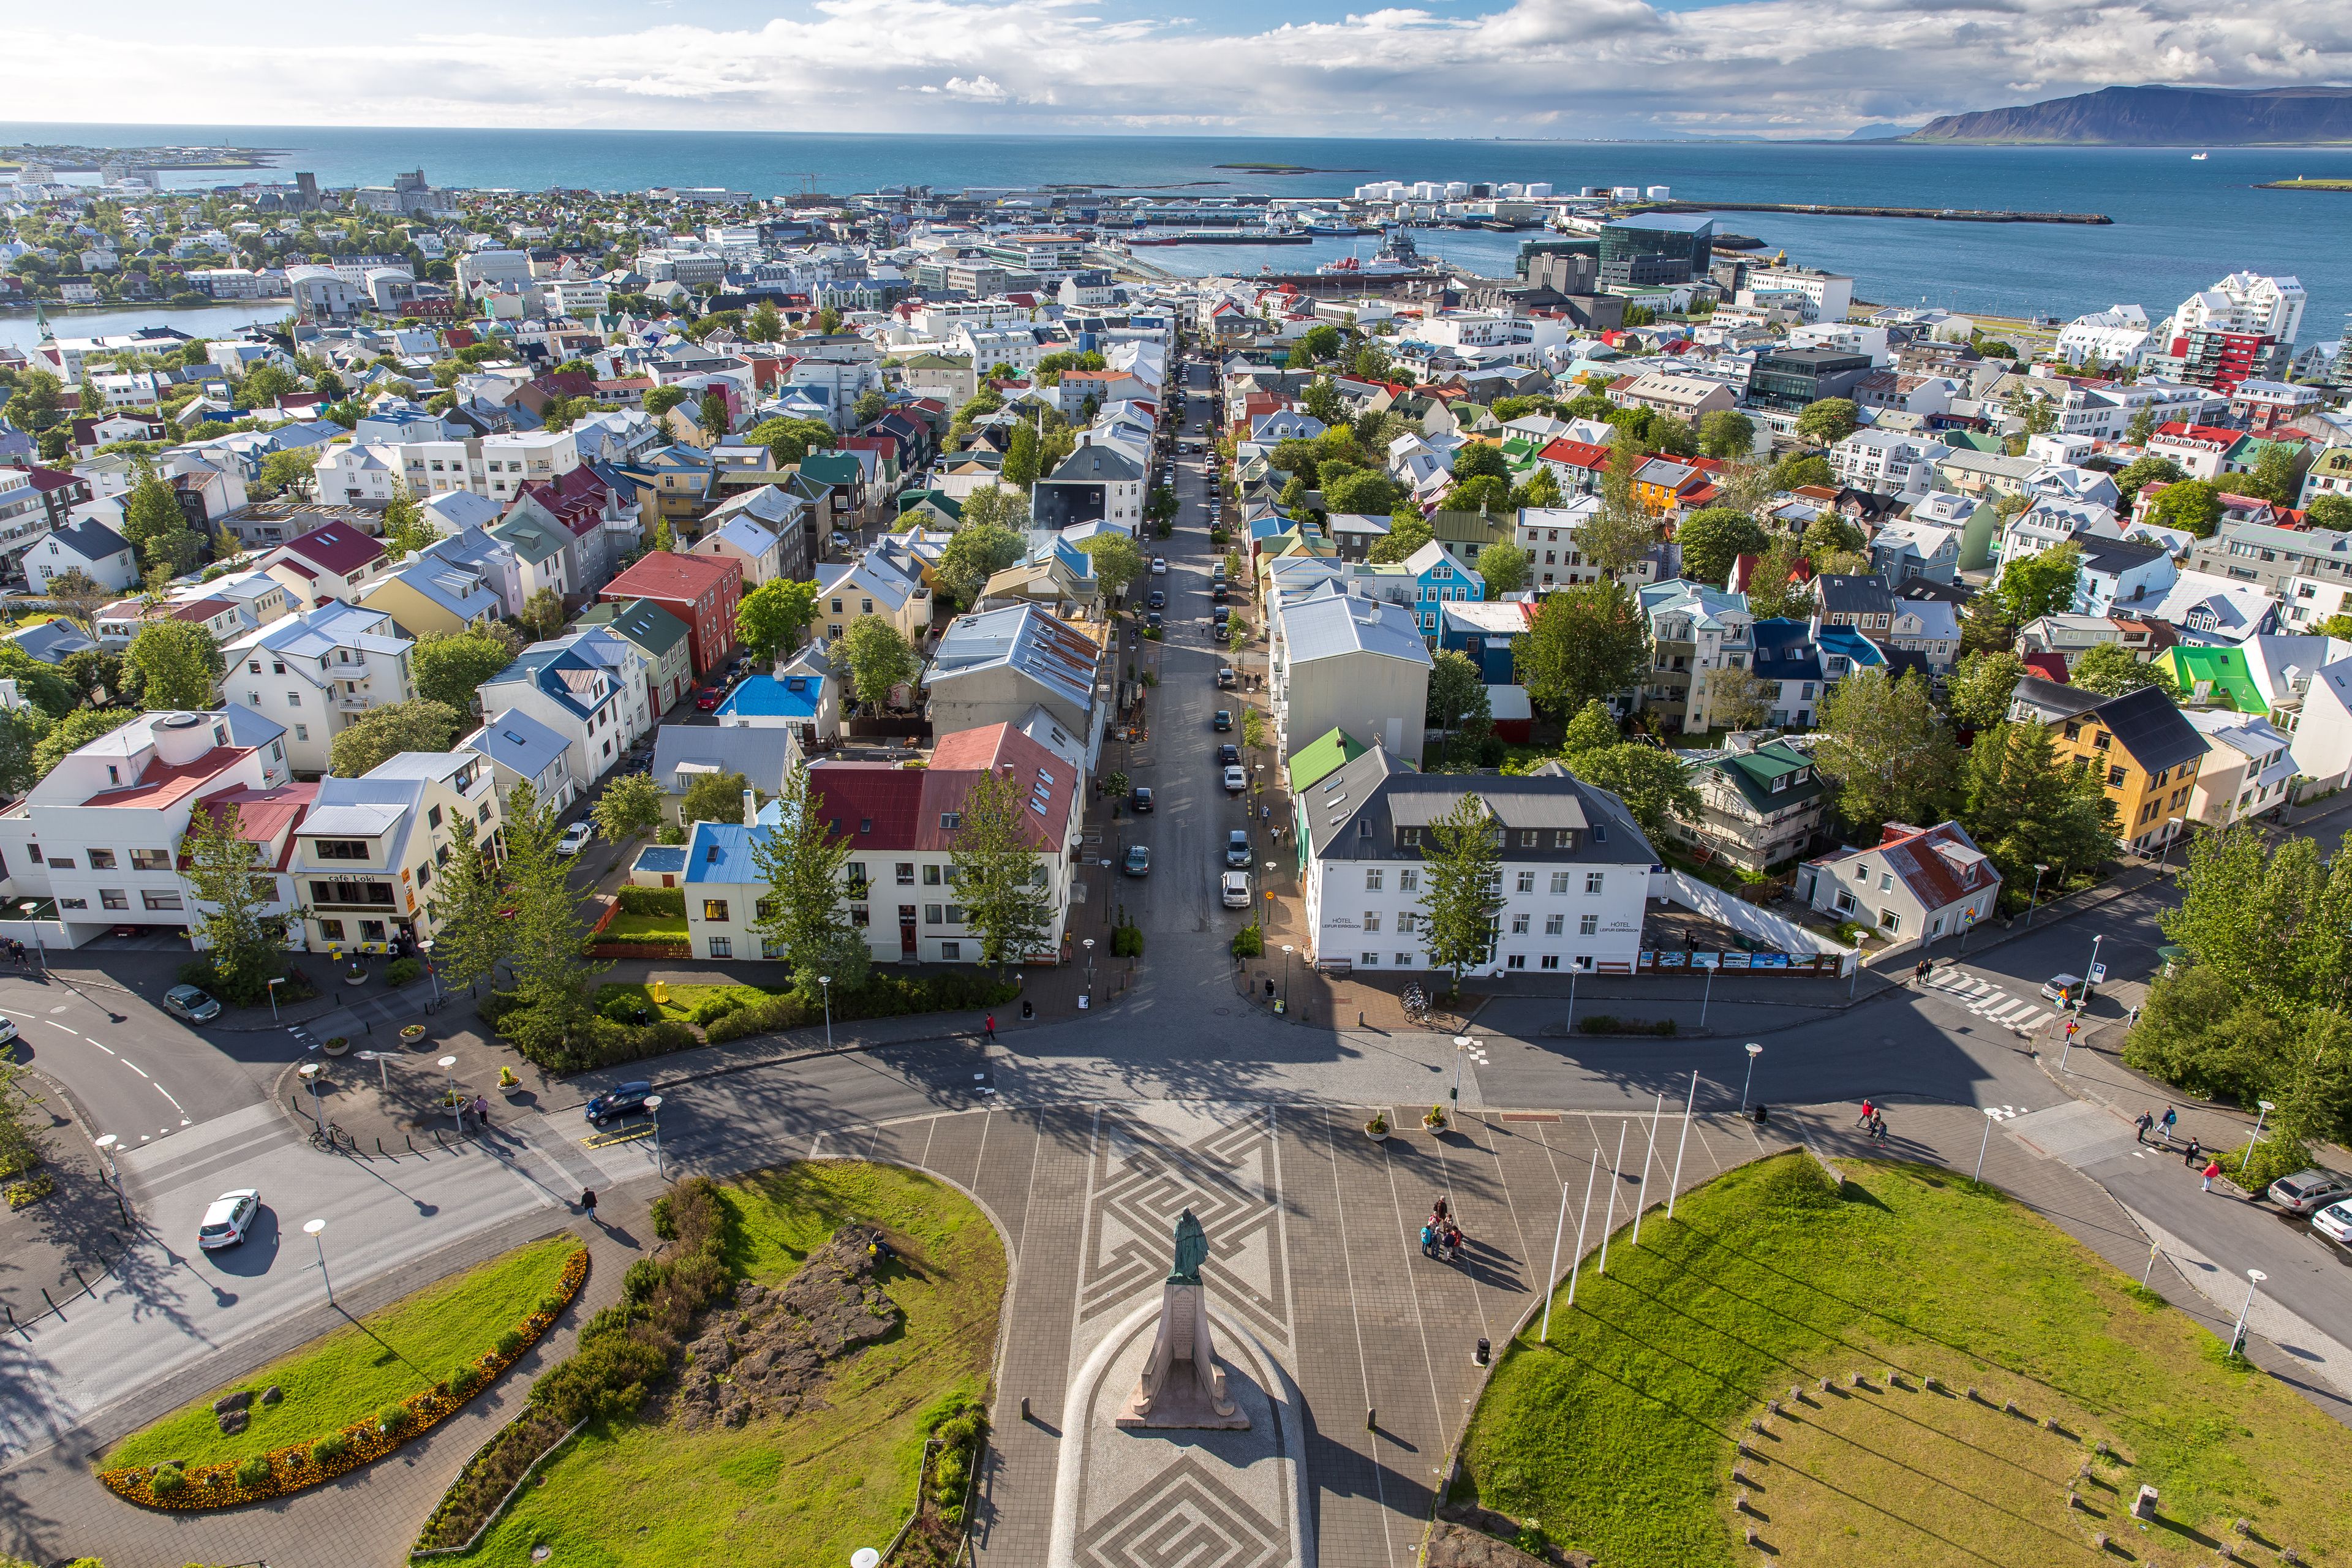 Reykjavik with view on Leif Eriksson Statue, Iceland